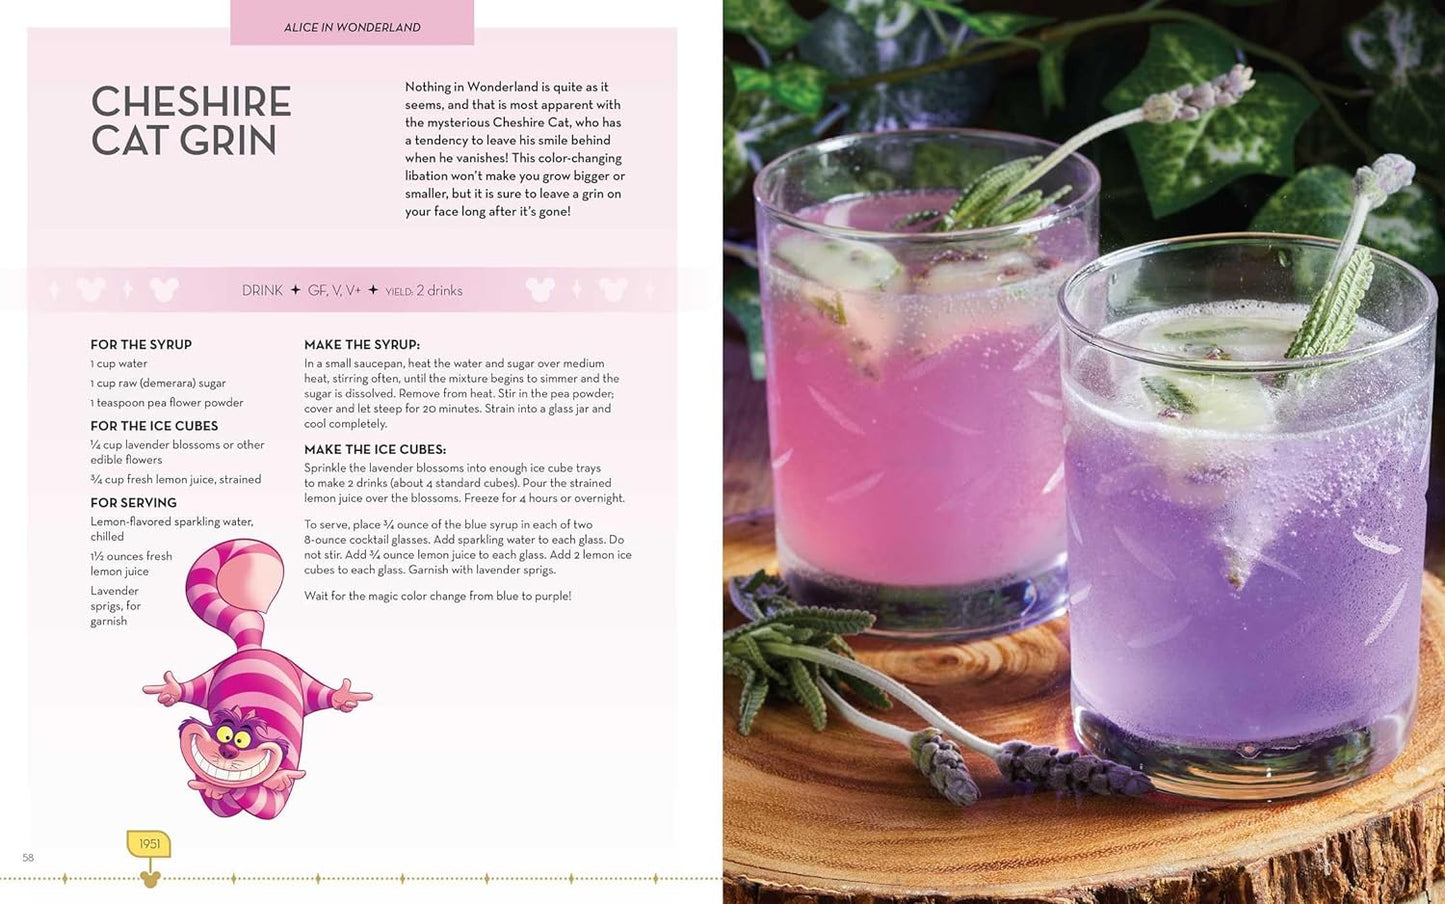 A two-page spread from the book. On the left is a recipe for a cheshire cat grin, with a drawing of the cheshire cat at the bottom. On the right are pink and purple cocktails on a wood plate.